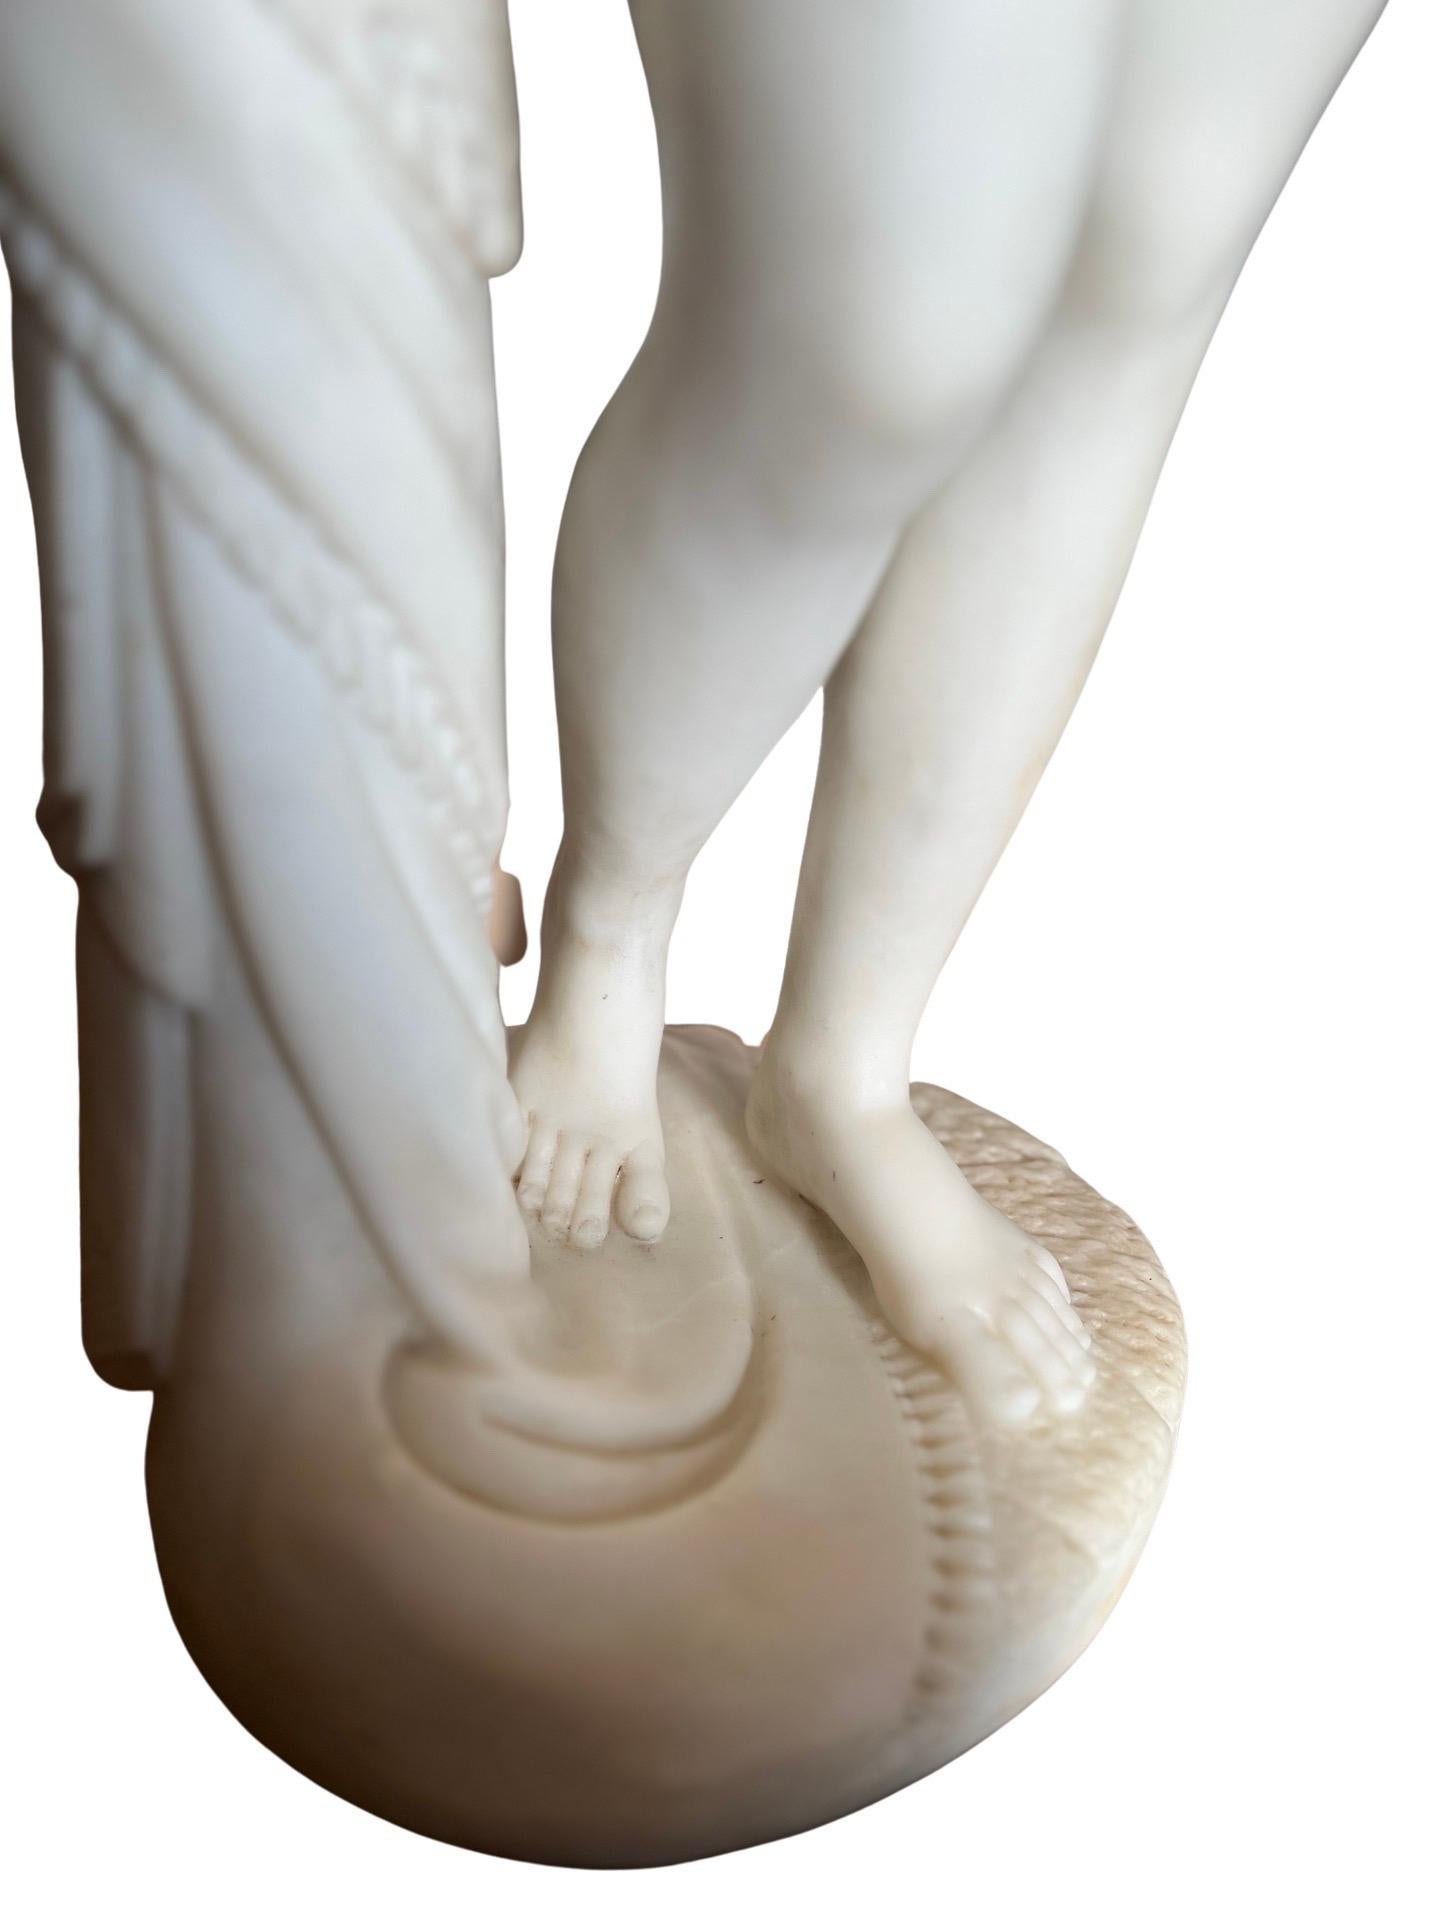 Classical Greek After Hiram Powers, Grand Tour Marble Sculpture of “the Greek Slave” For Sale